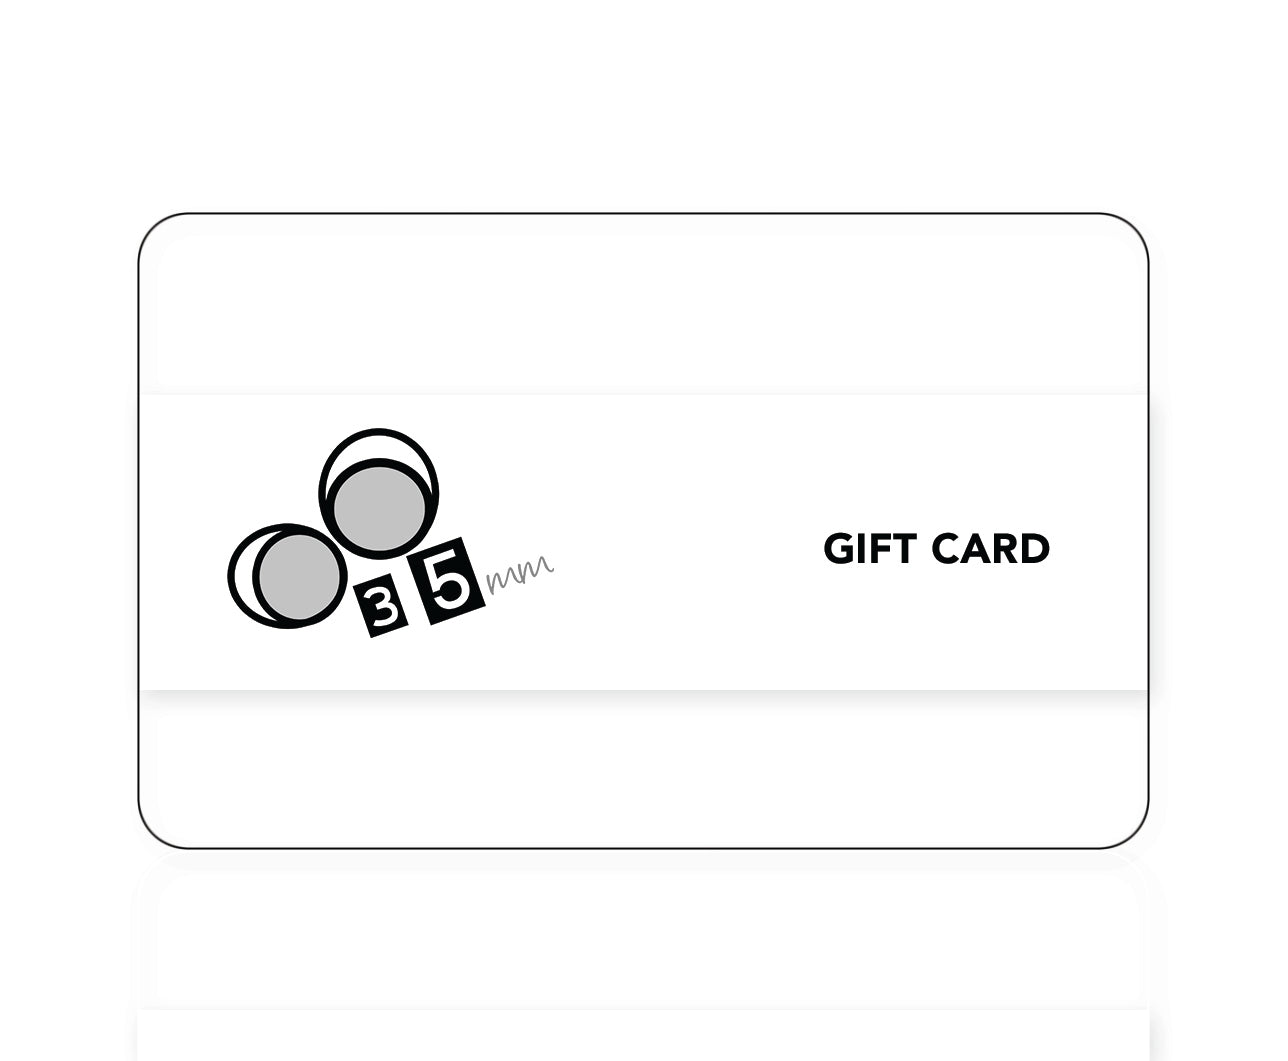 In-store Gift Card Gift Card oo35mm   